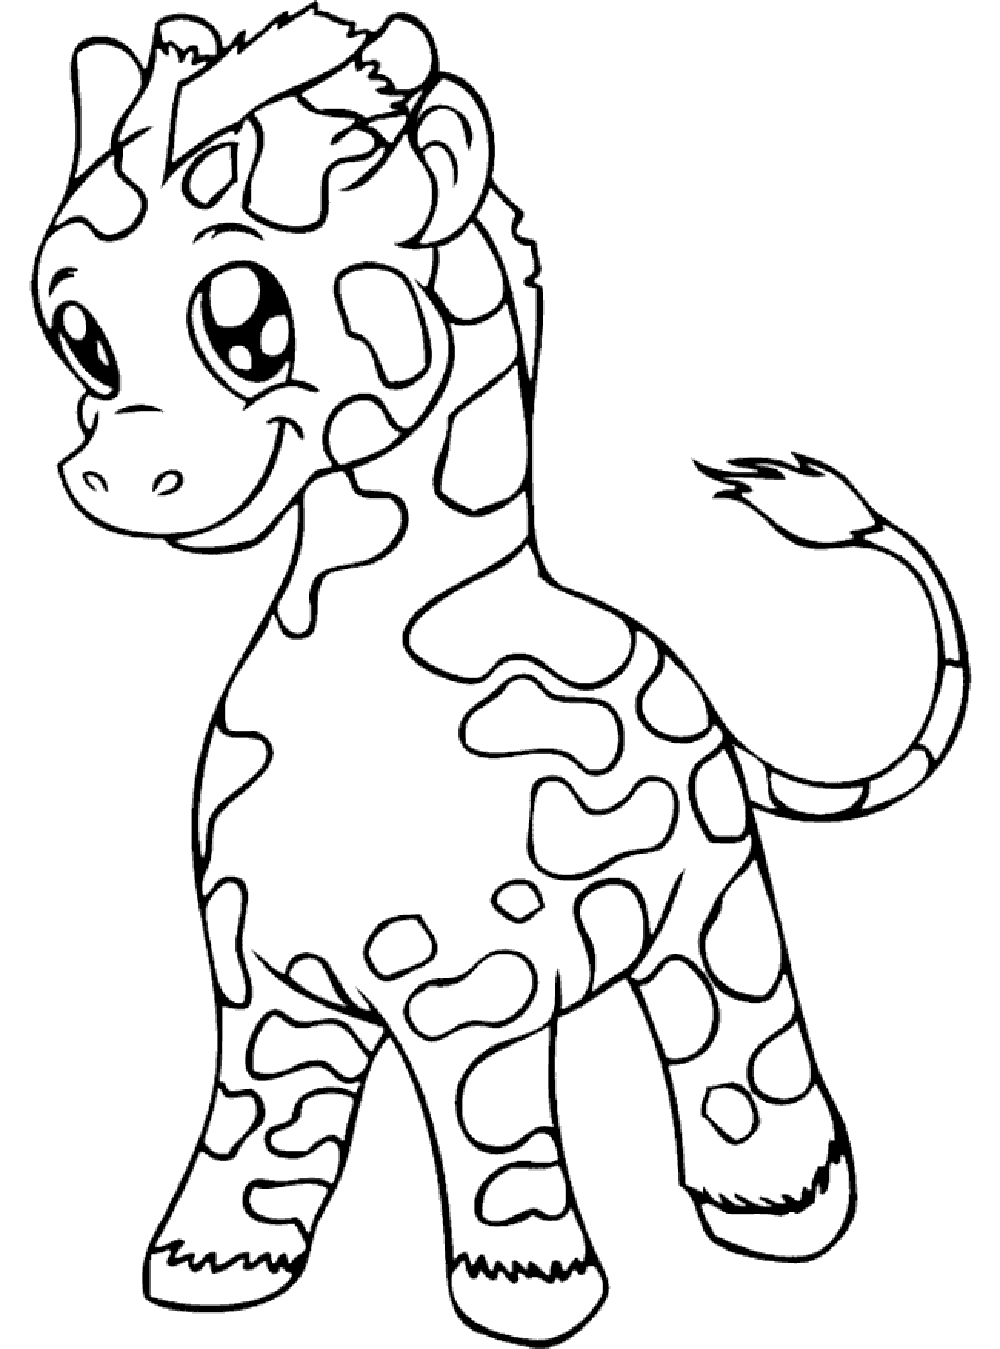 Giraffes Kids Coloring Pages